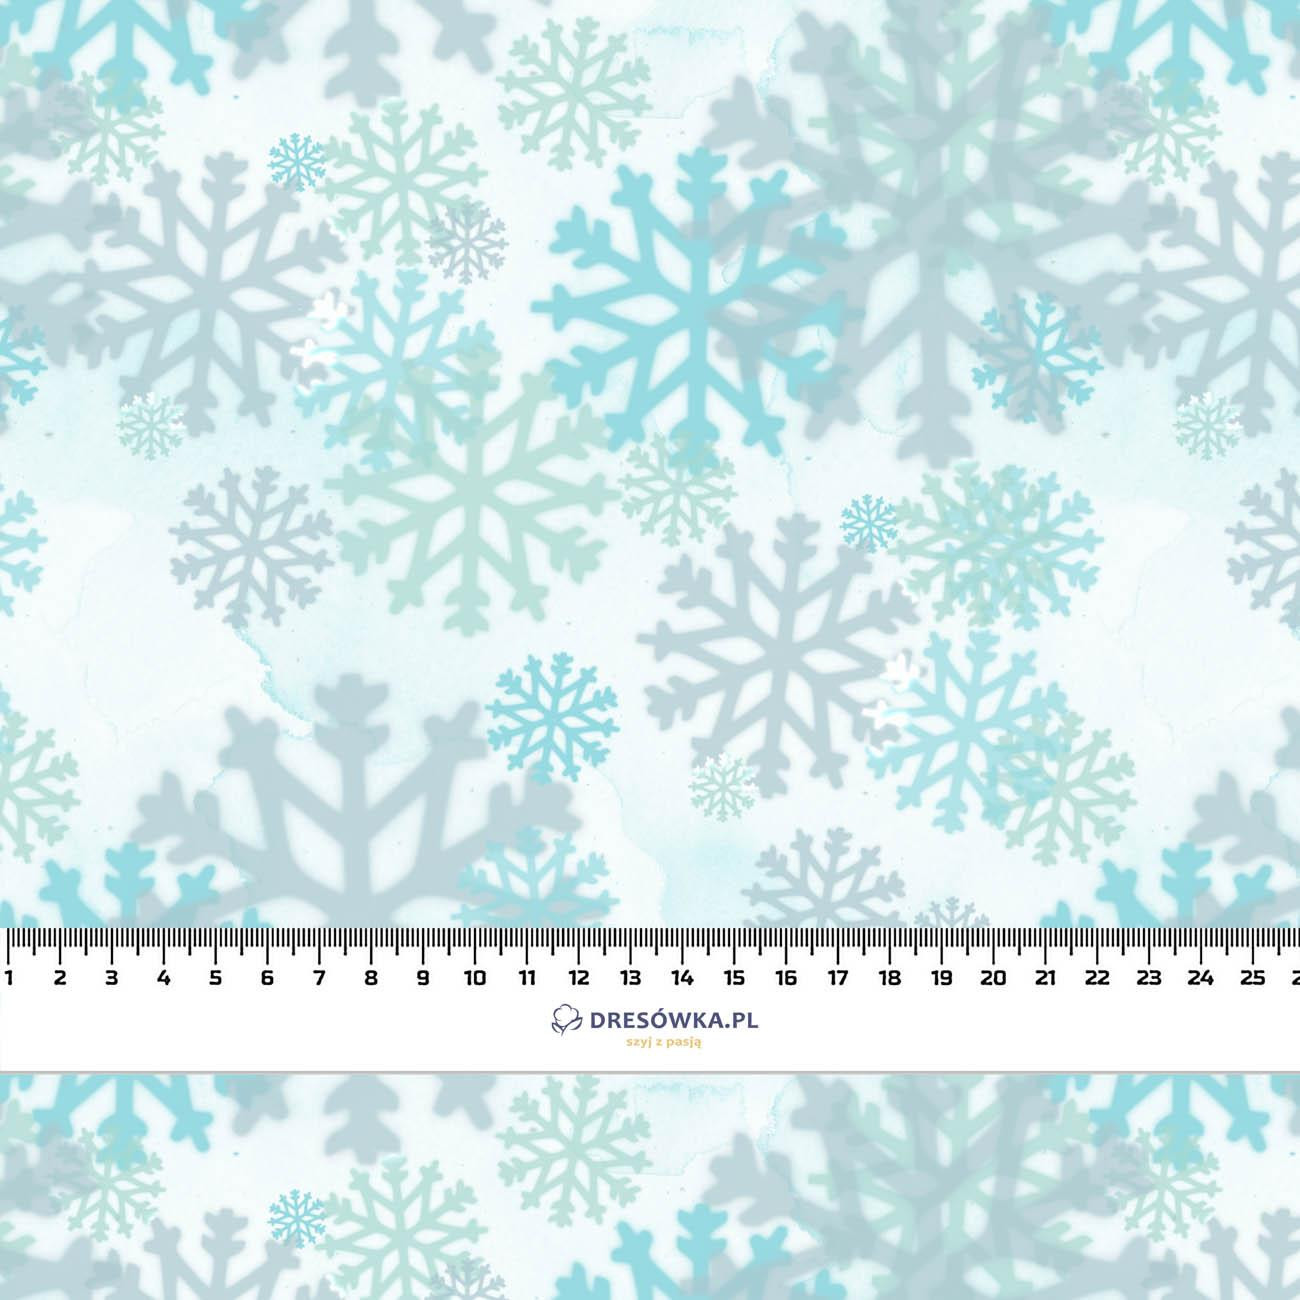 SNOWFLAKES pat. 4 (WINTER IN THE CITY) - Cotton woven fabric